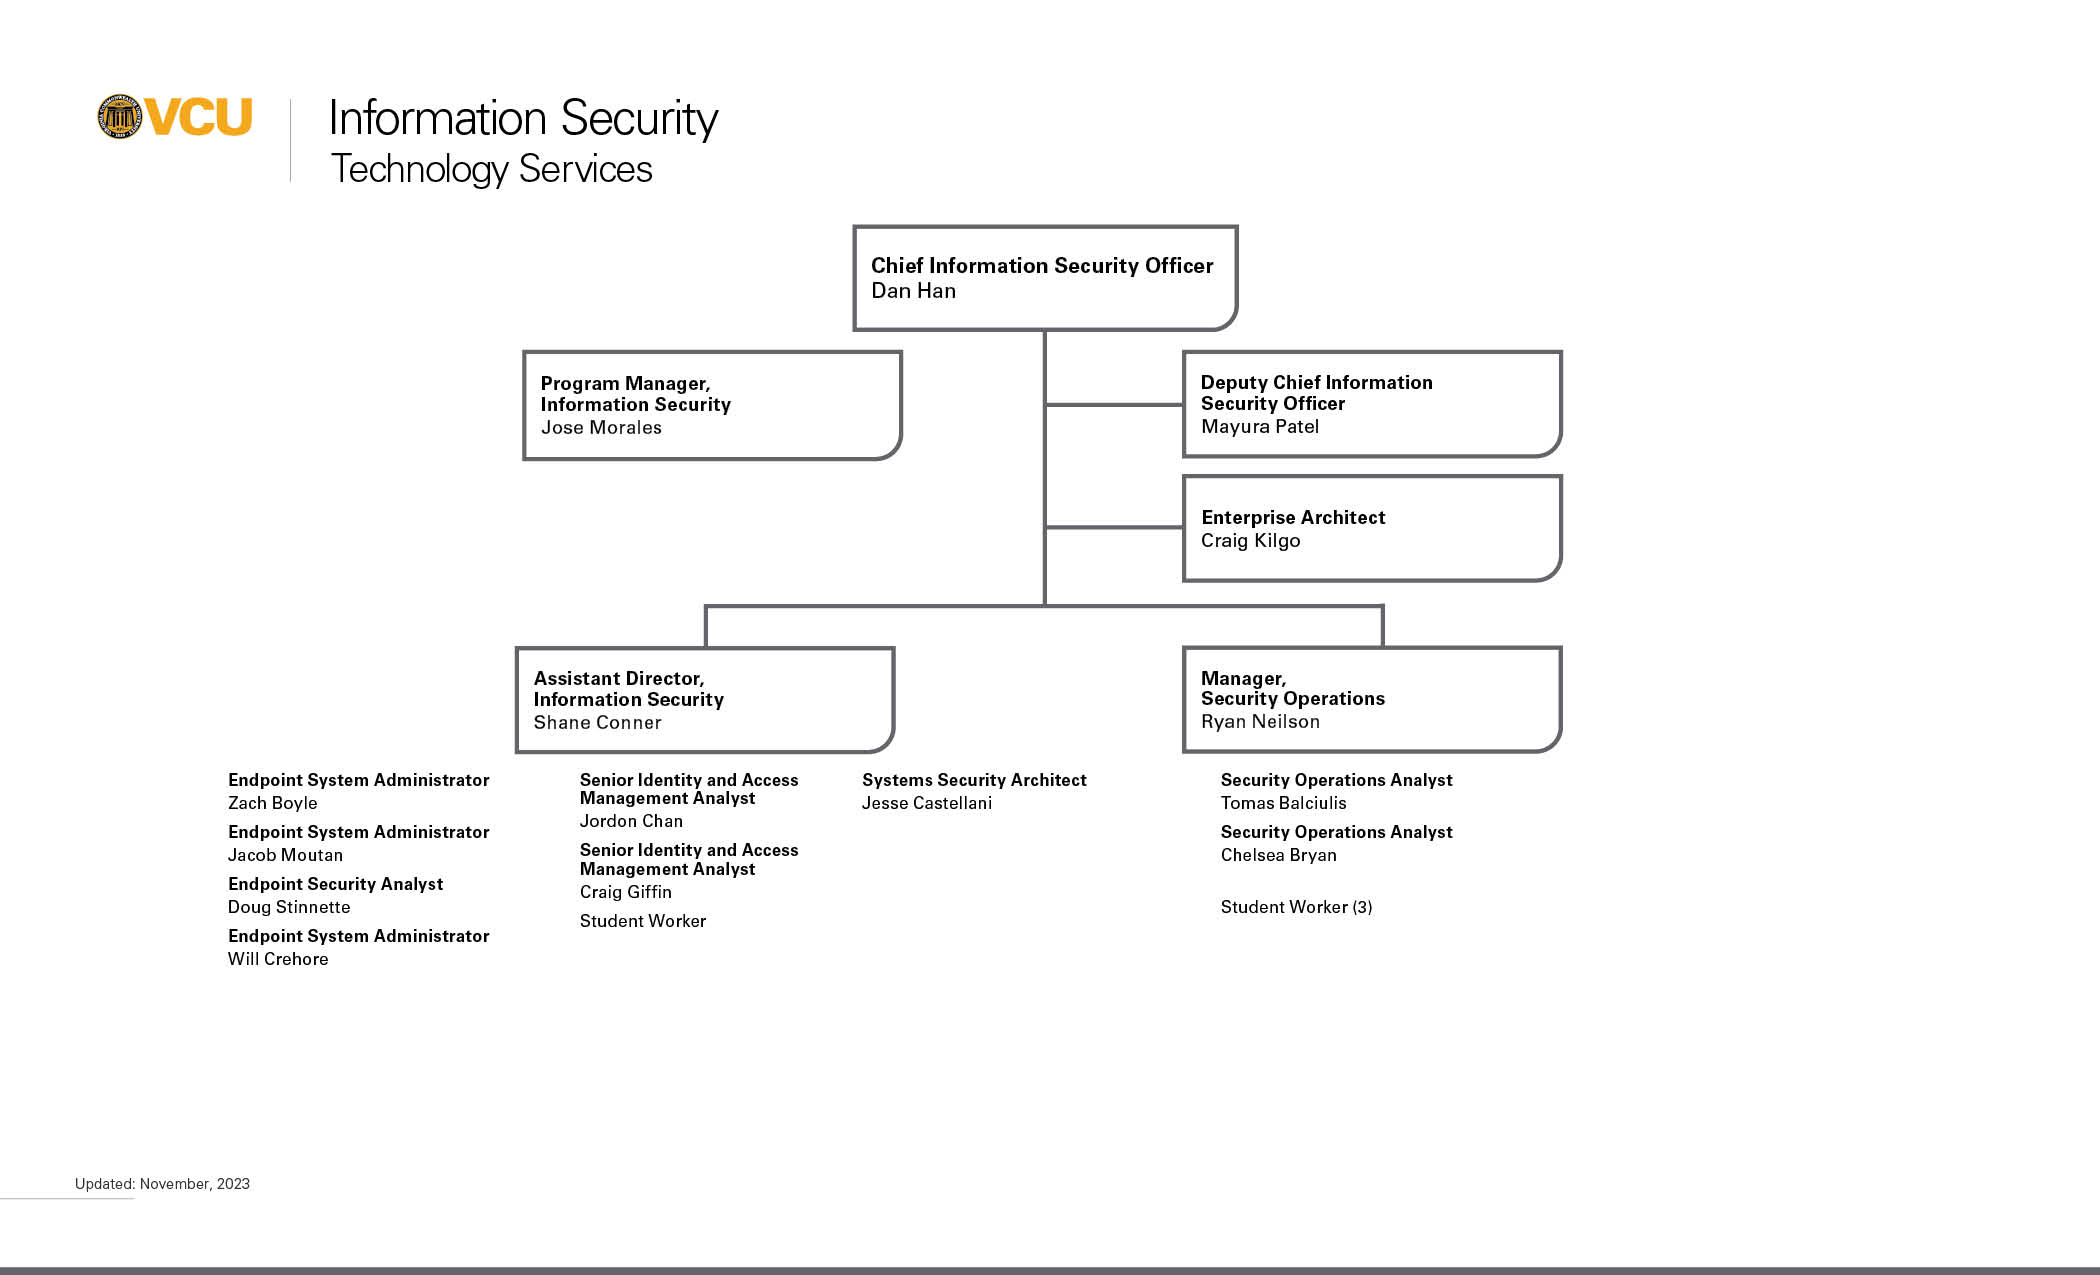 Info Security org chart